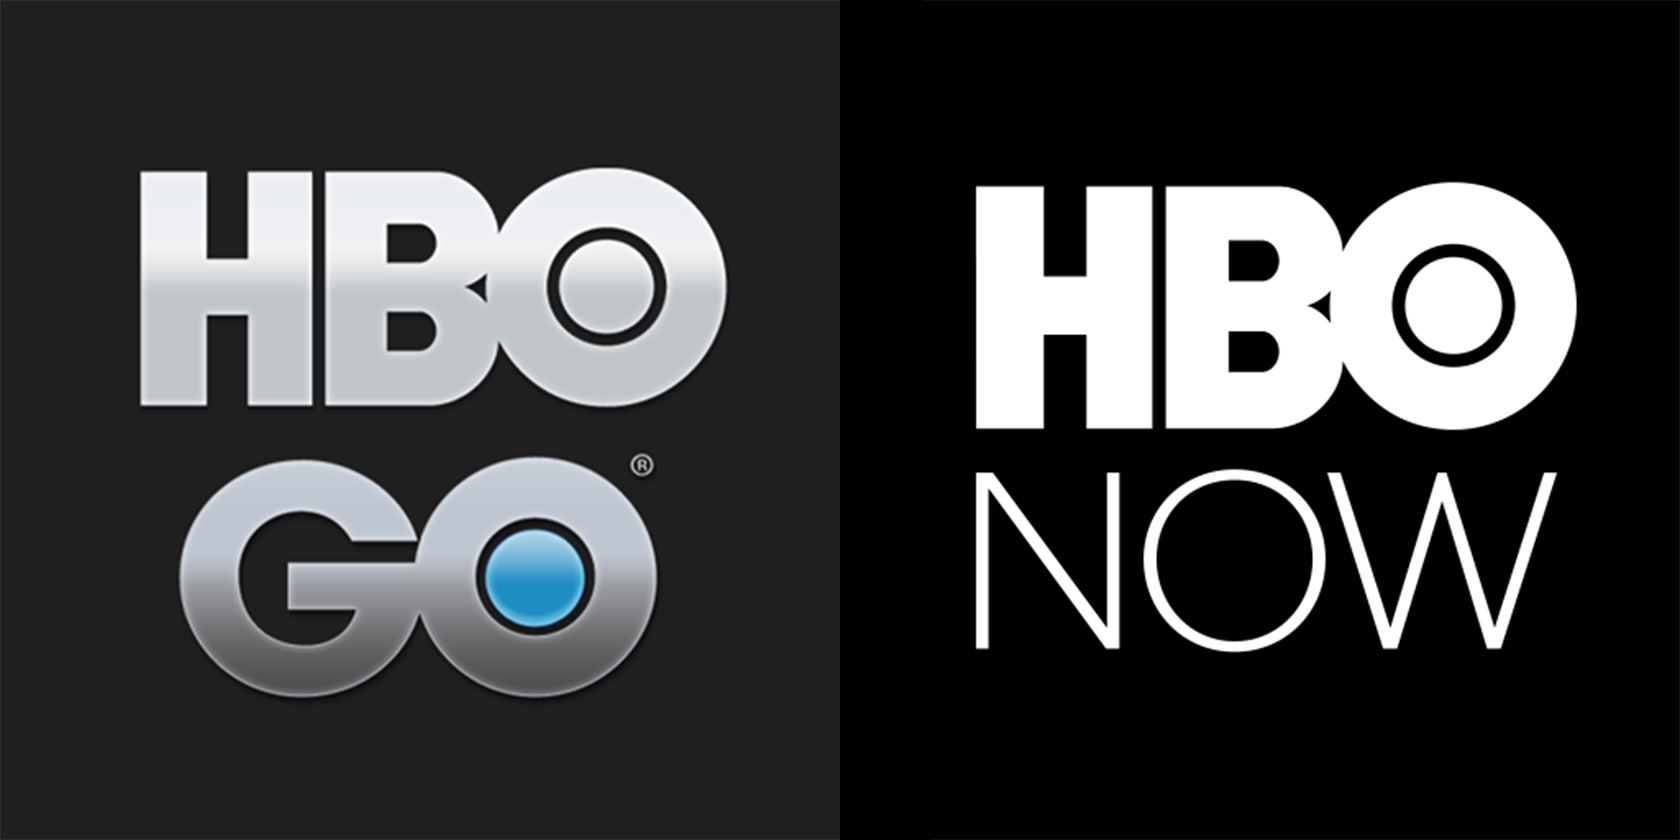 HBO Go joins TWC and Cablevision